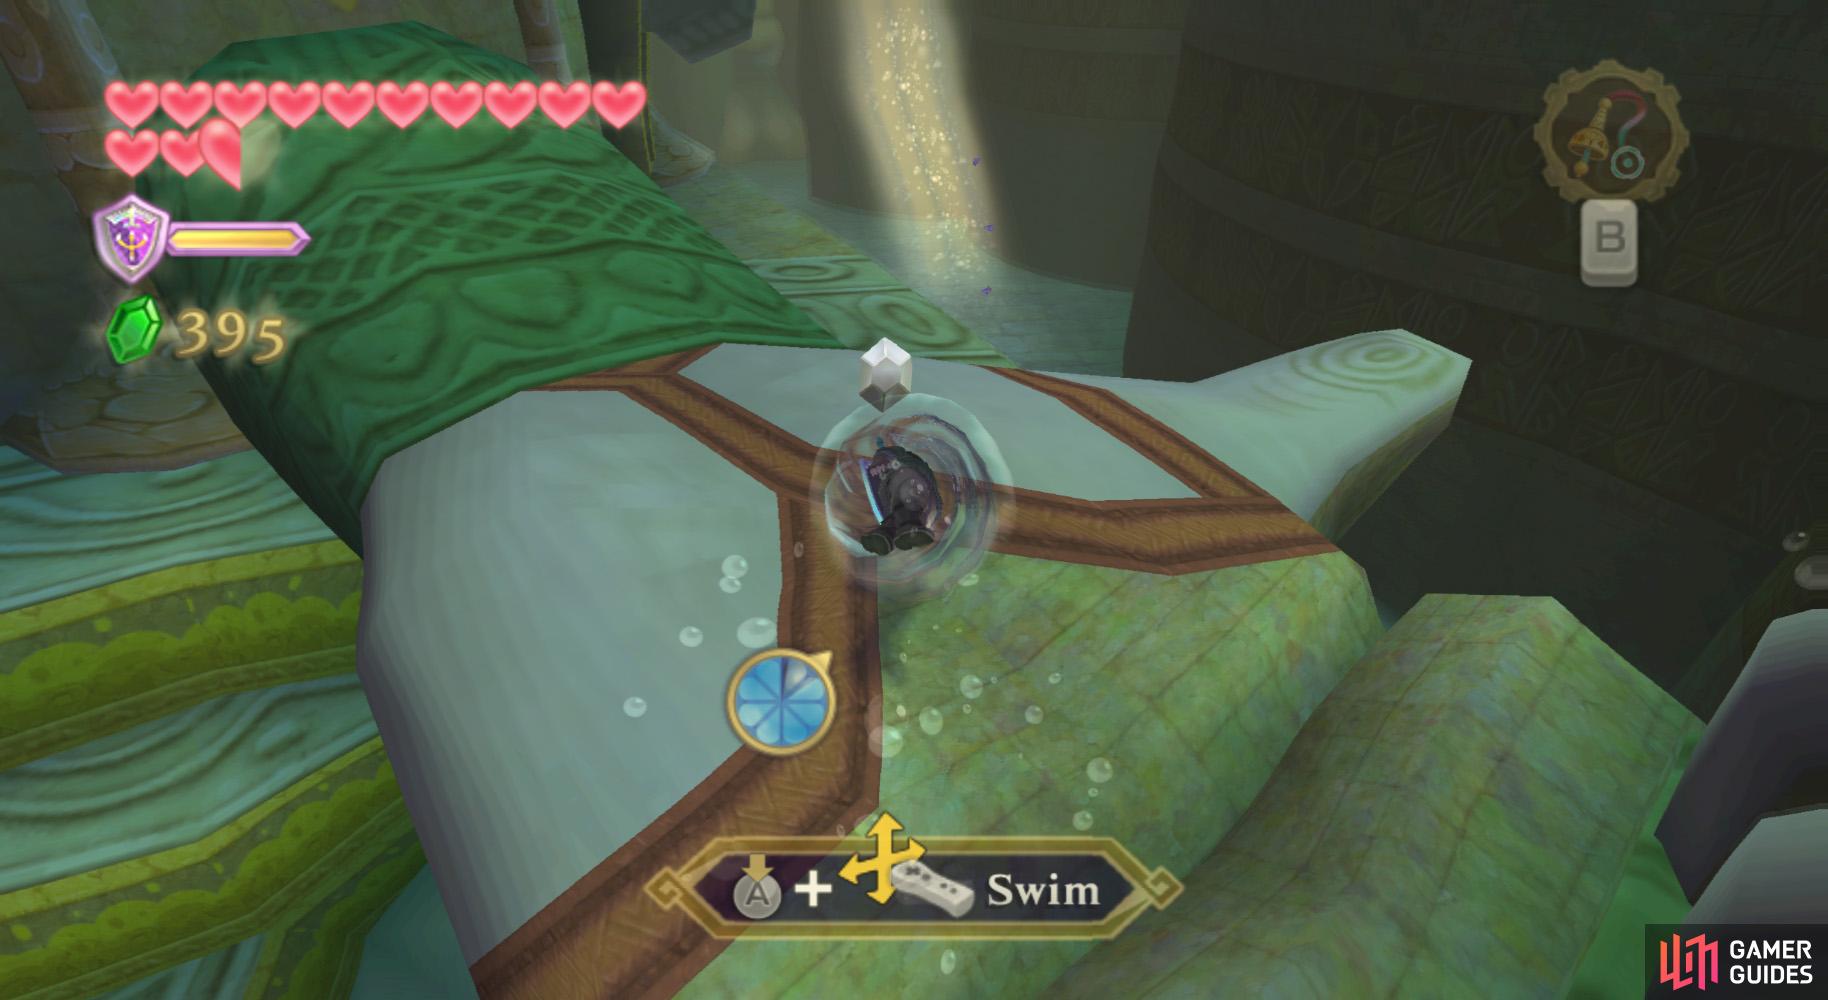 When youve got some free time, use a spin attack to collect the Silver Rupees in the first area without being grabbed.